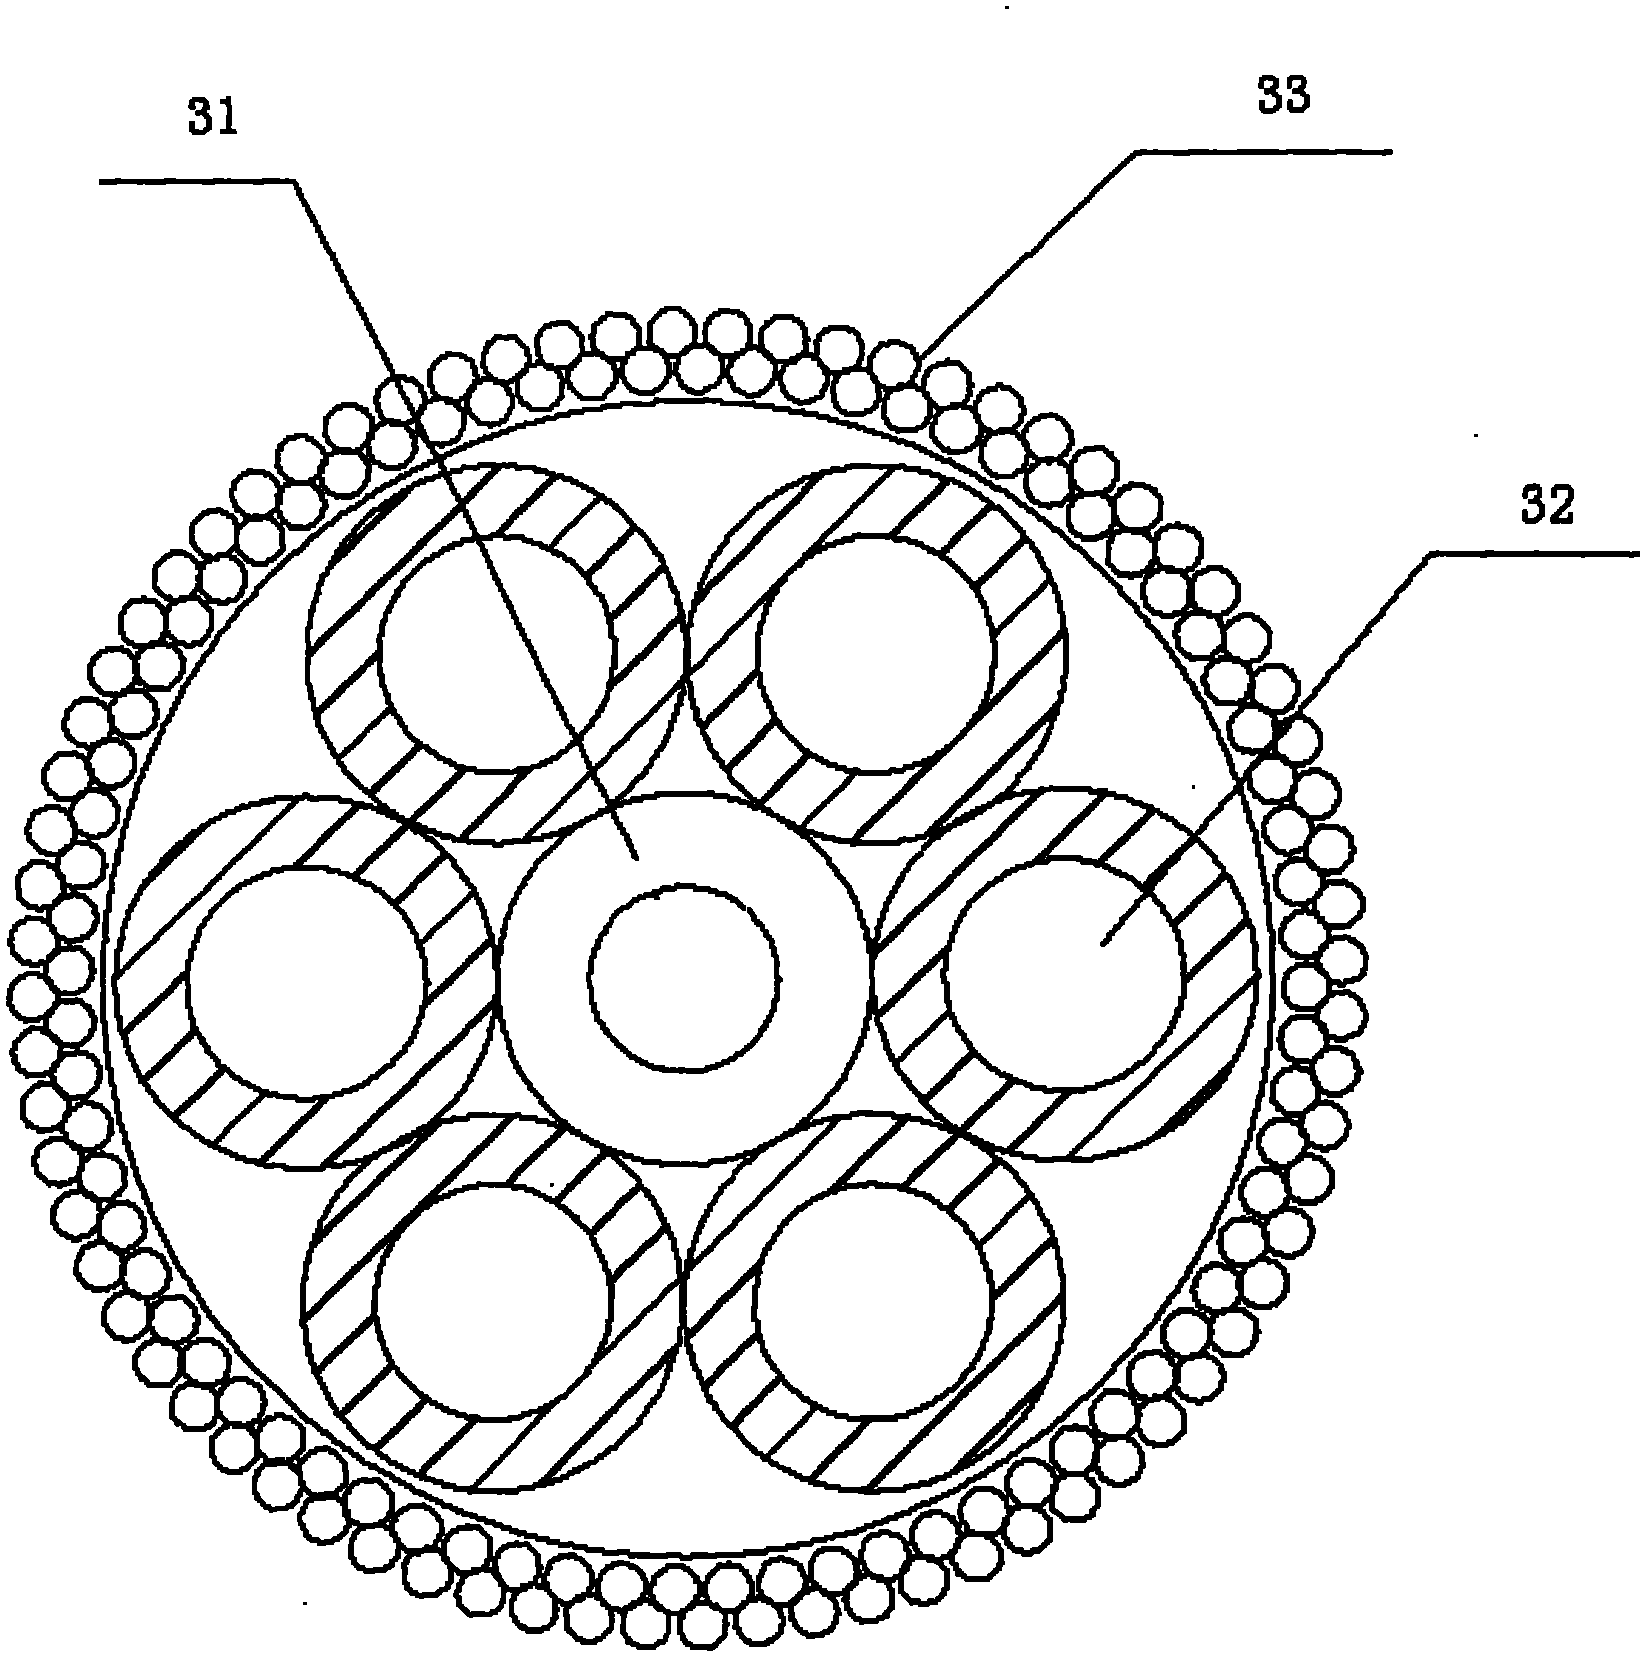 Improved system and method for detecting wall thickness and corrosion of well casing of gas storage well